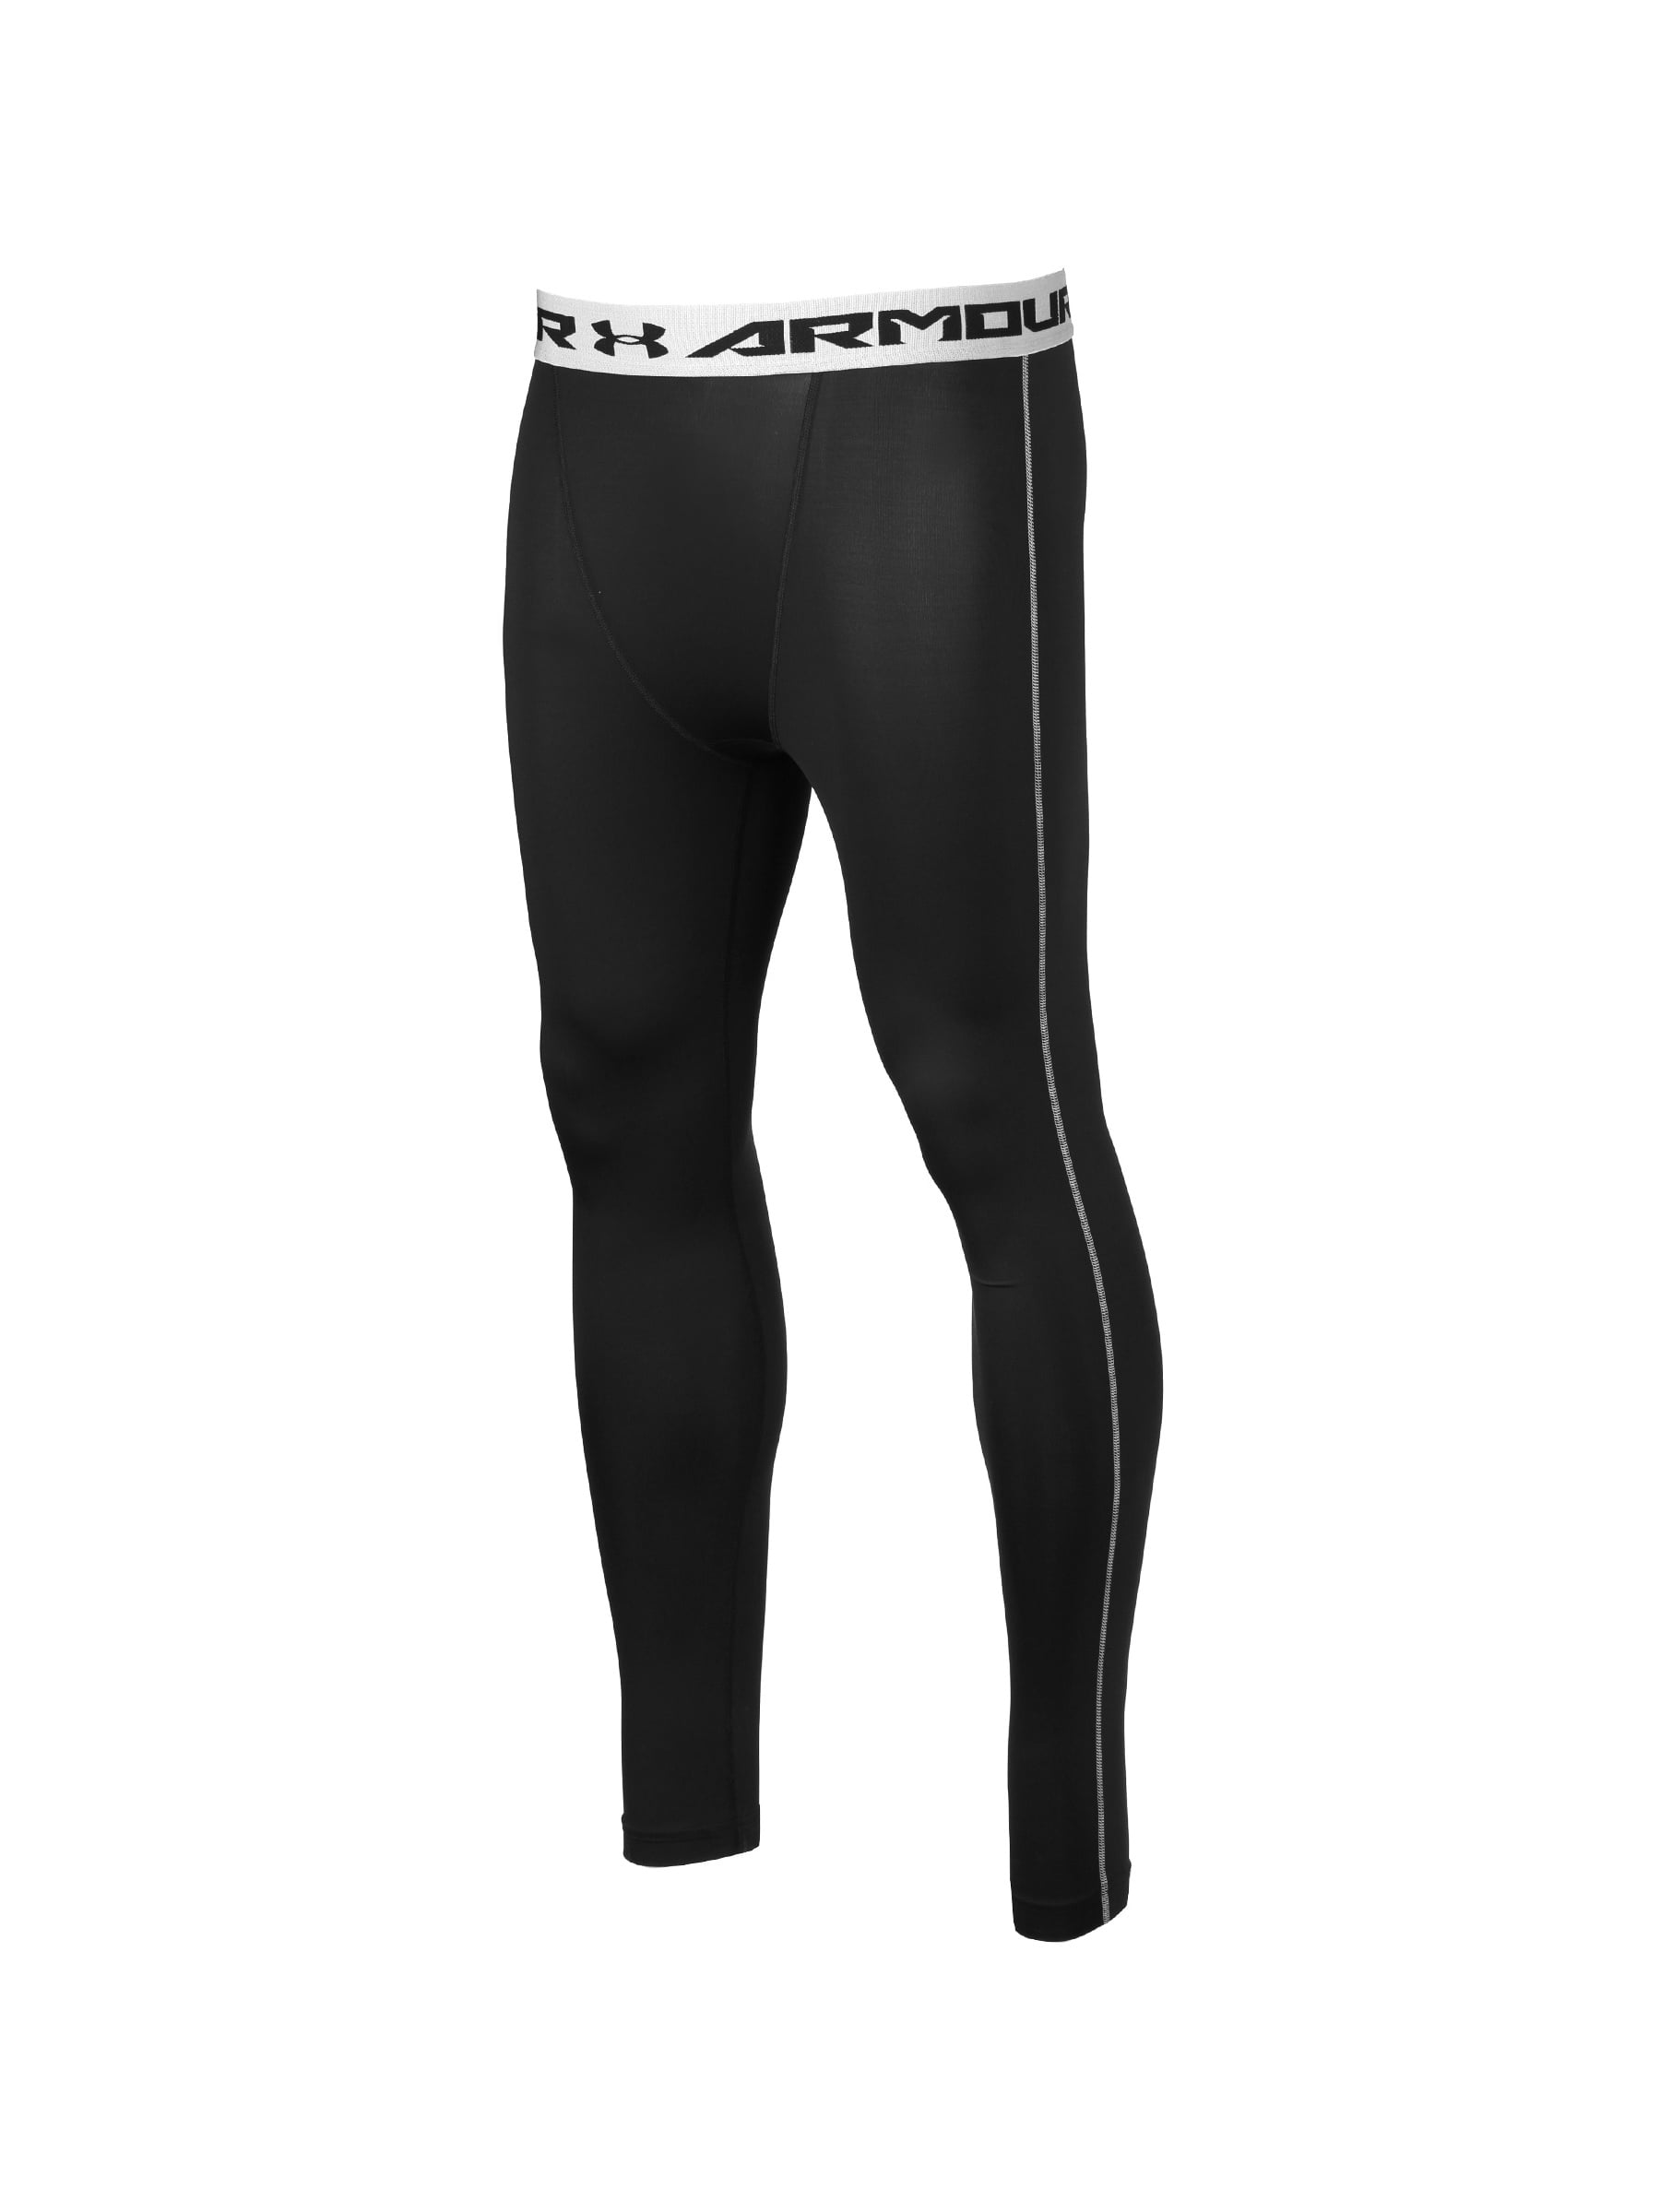 UNDER ARMOUR Men Black Solid Heat Gear Armour 2.0 Compression Tights